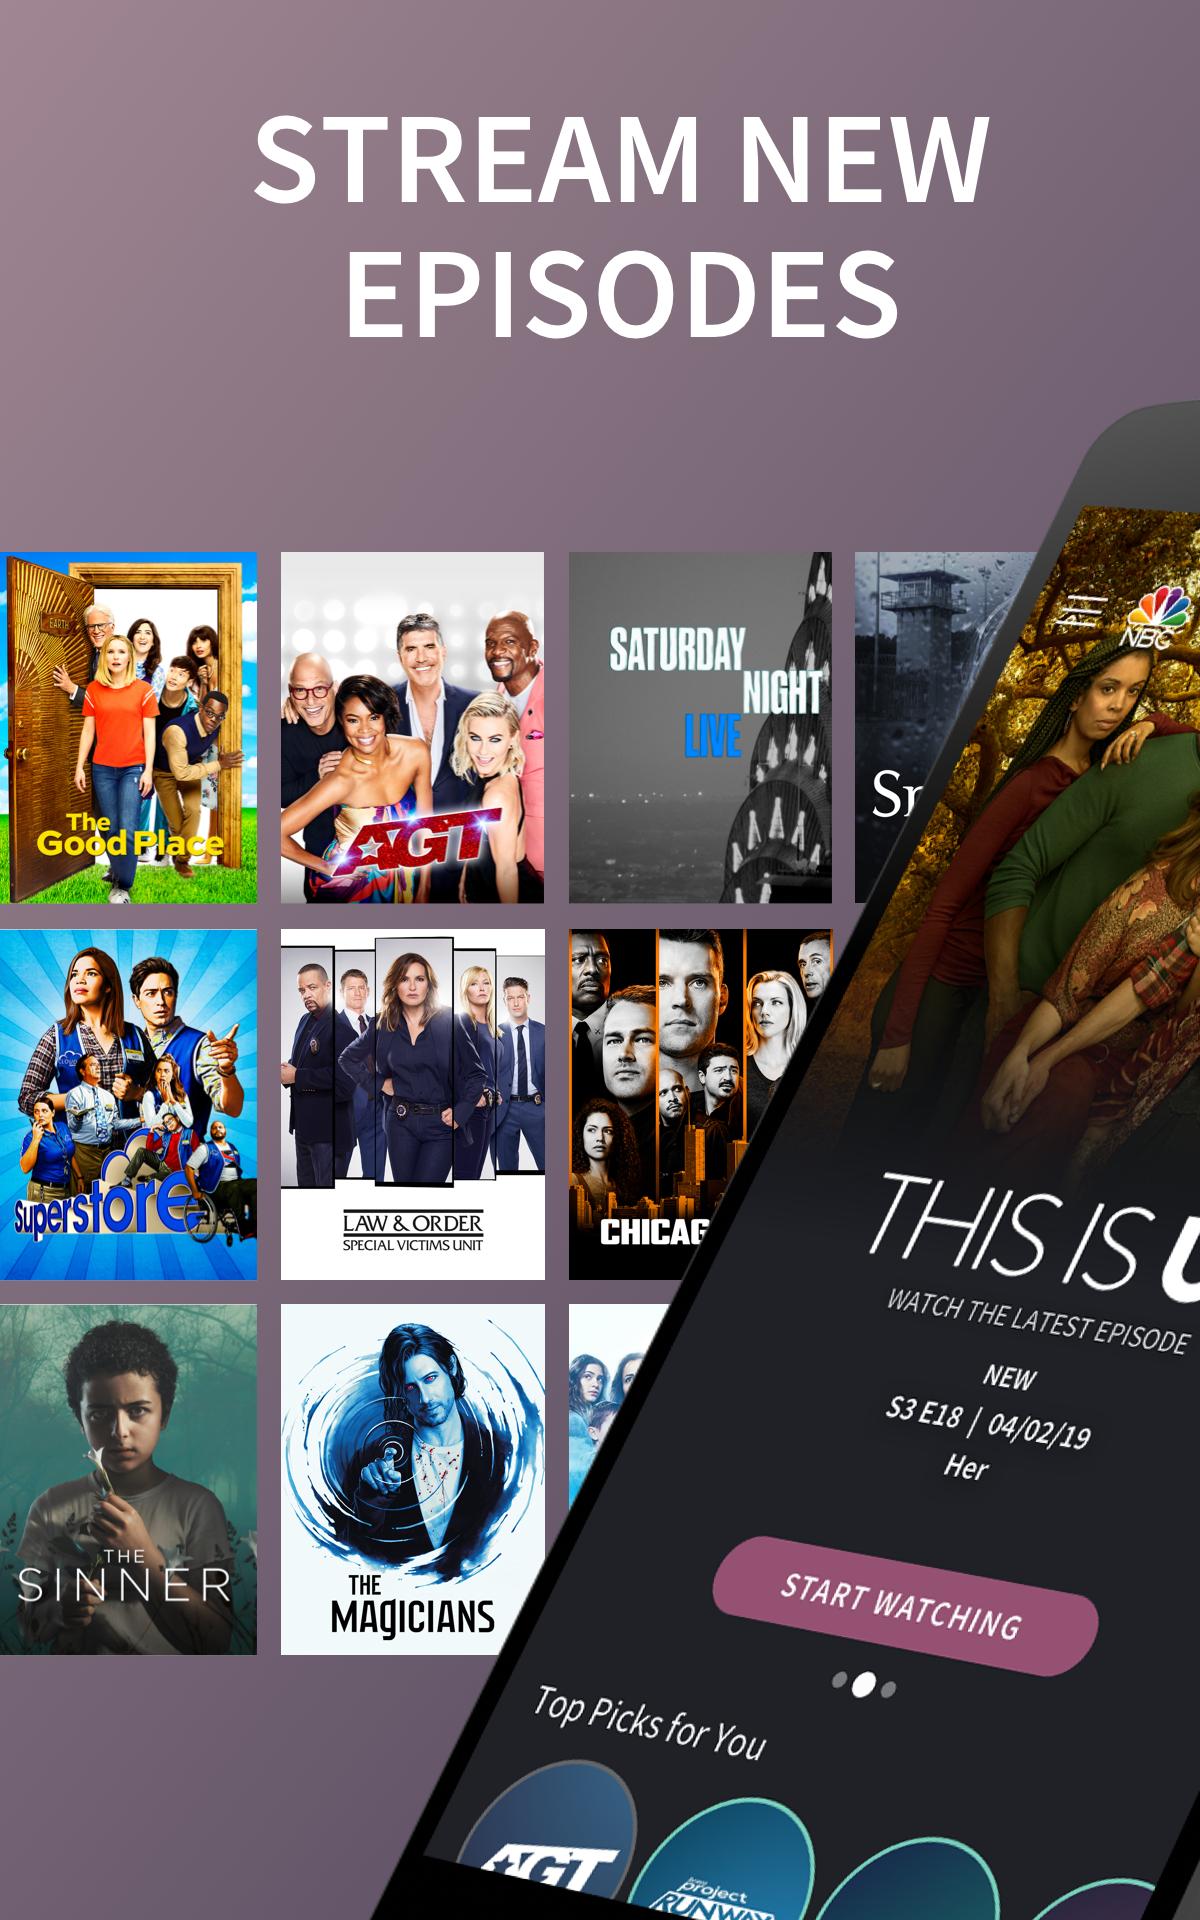 The NBC App - Stream Live TV and Episodes for Free 7.4.1 Screenshot 11